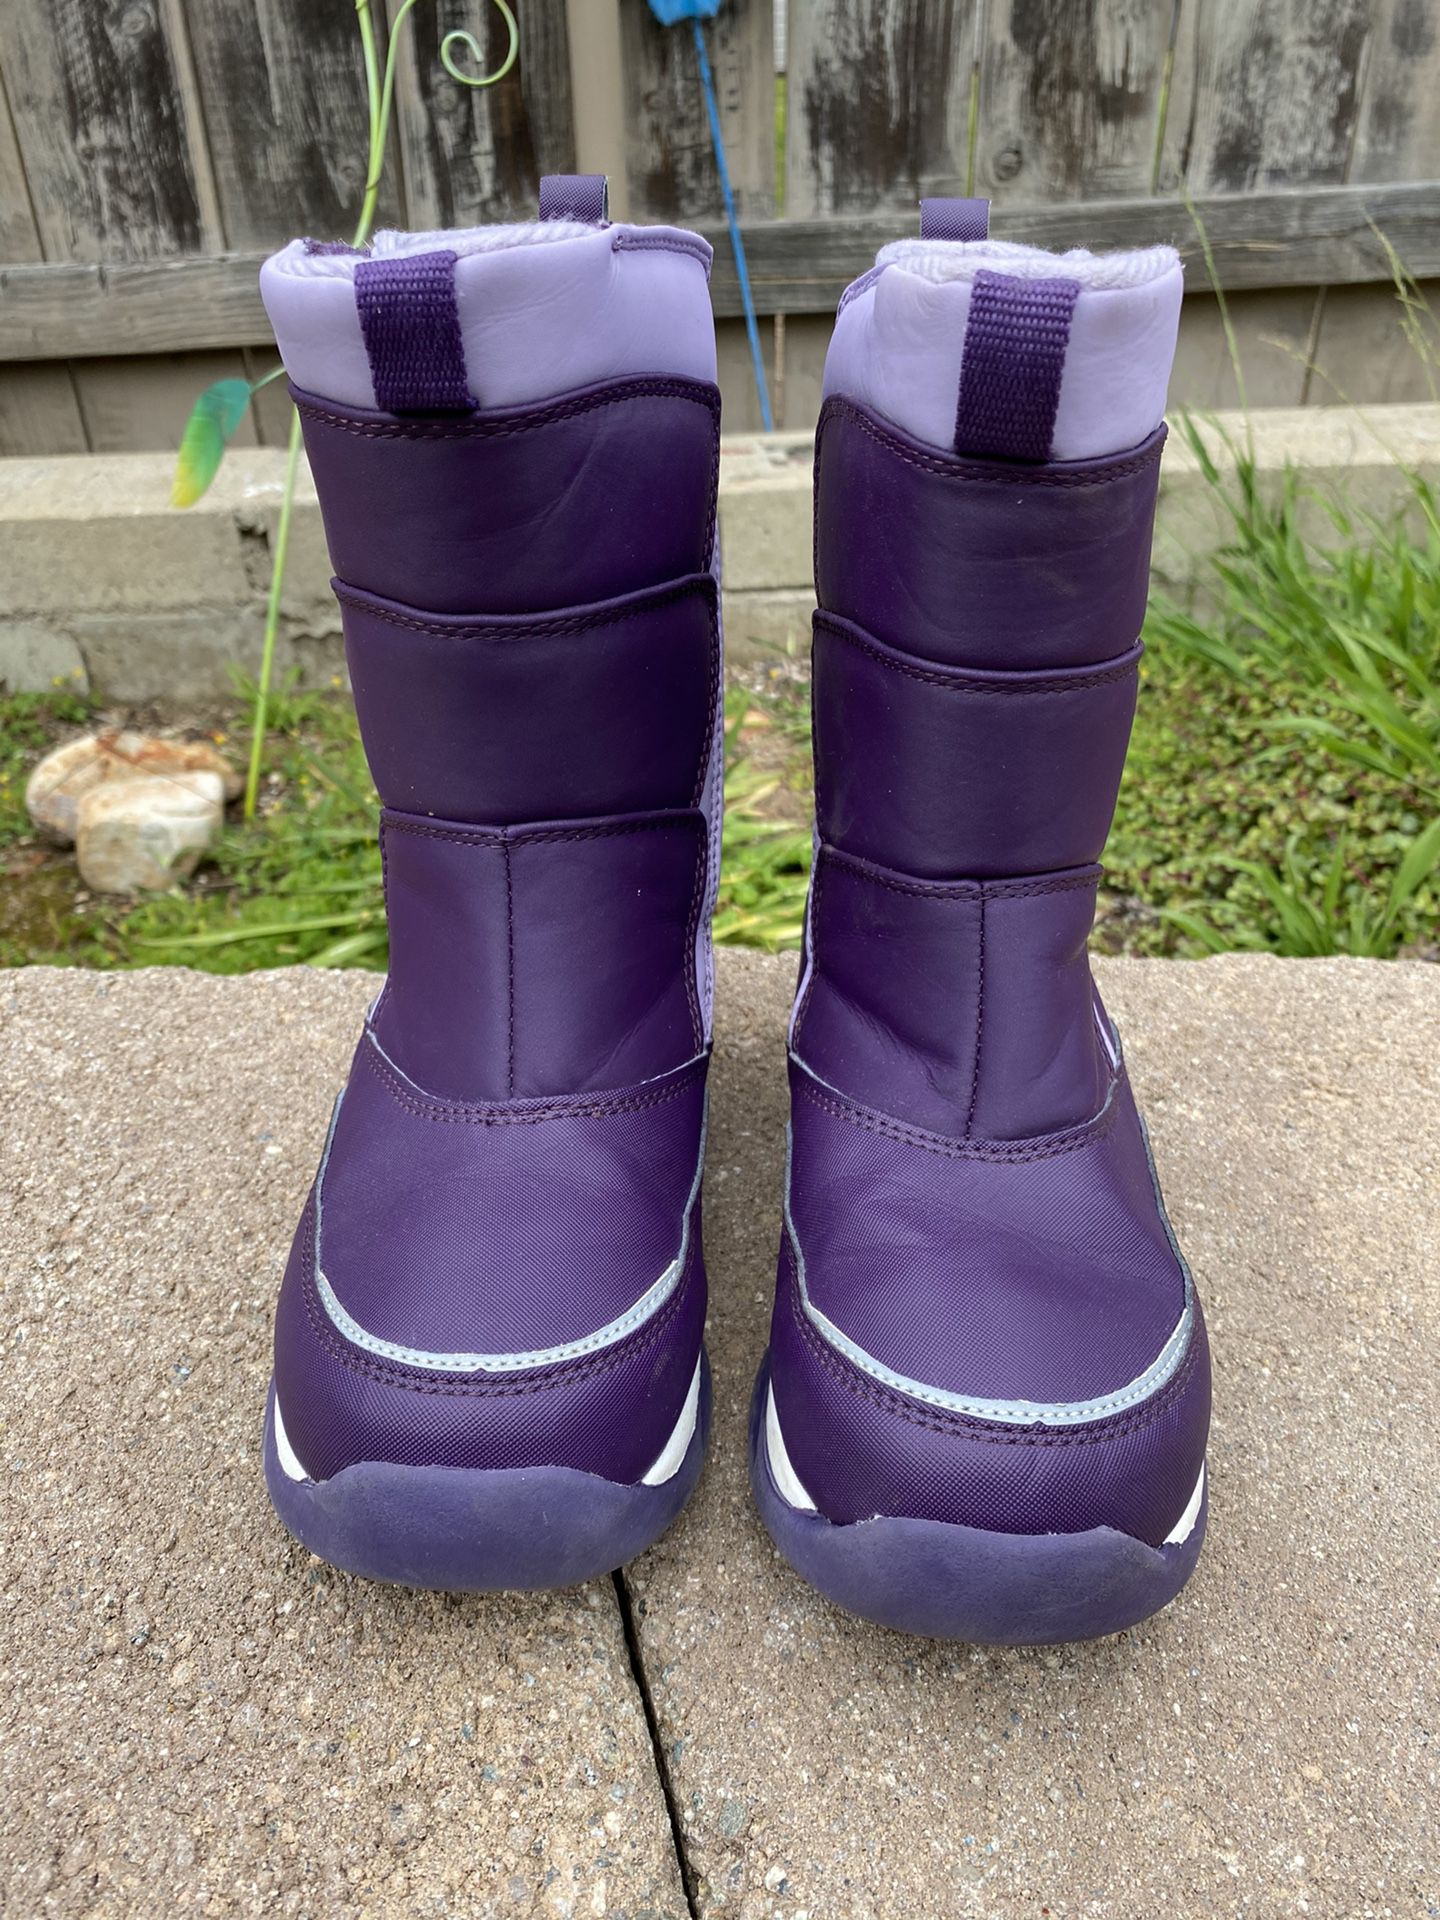 Lands' End Girls Snow Flurry Winter Snow Boots Purple Youth Kids Size 3M